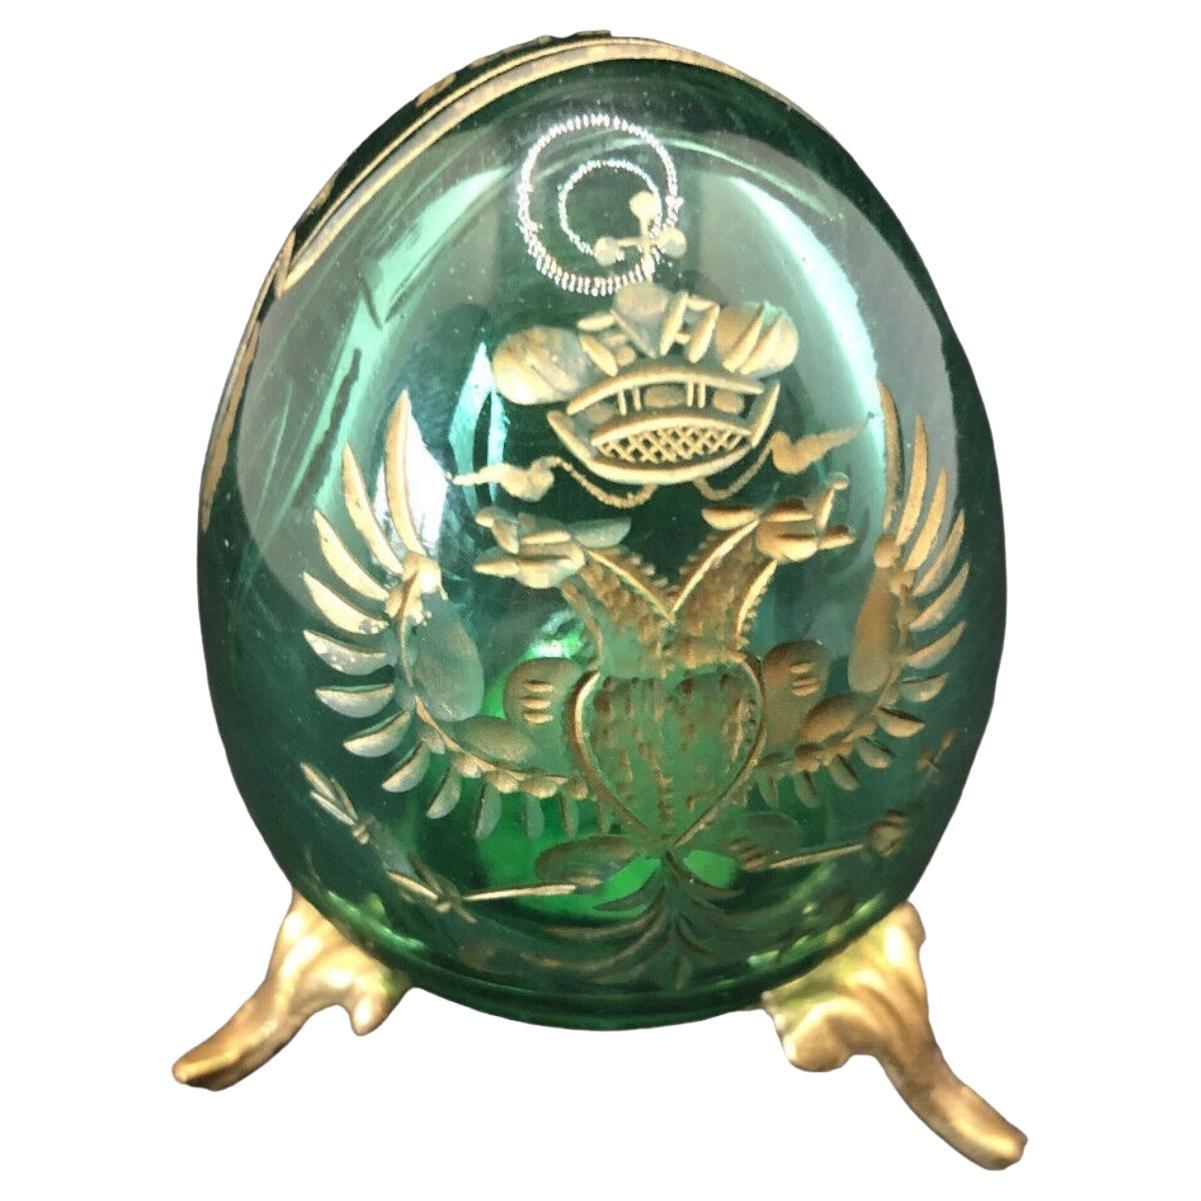 Vintage Faberge Russia style glass egg with etched decorations. Reminiscent of eggs from St. Petersburg. Stand is not included in this offer. A nice addition to your collection. 